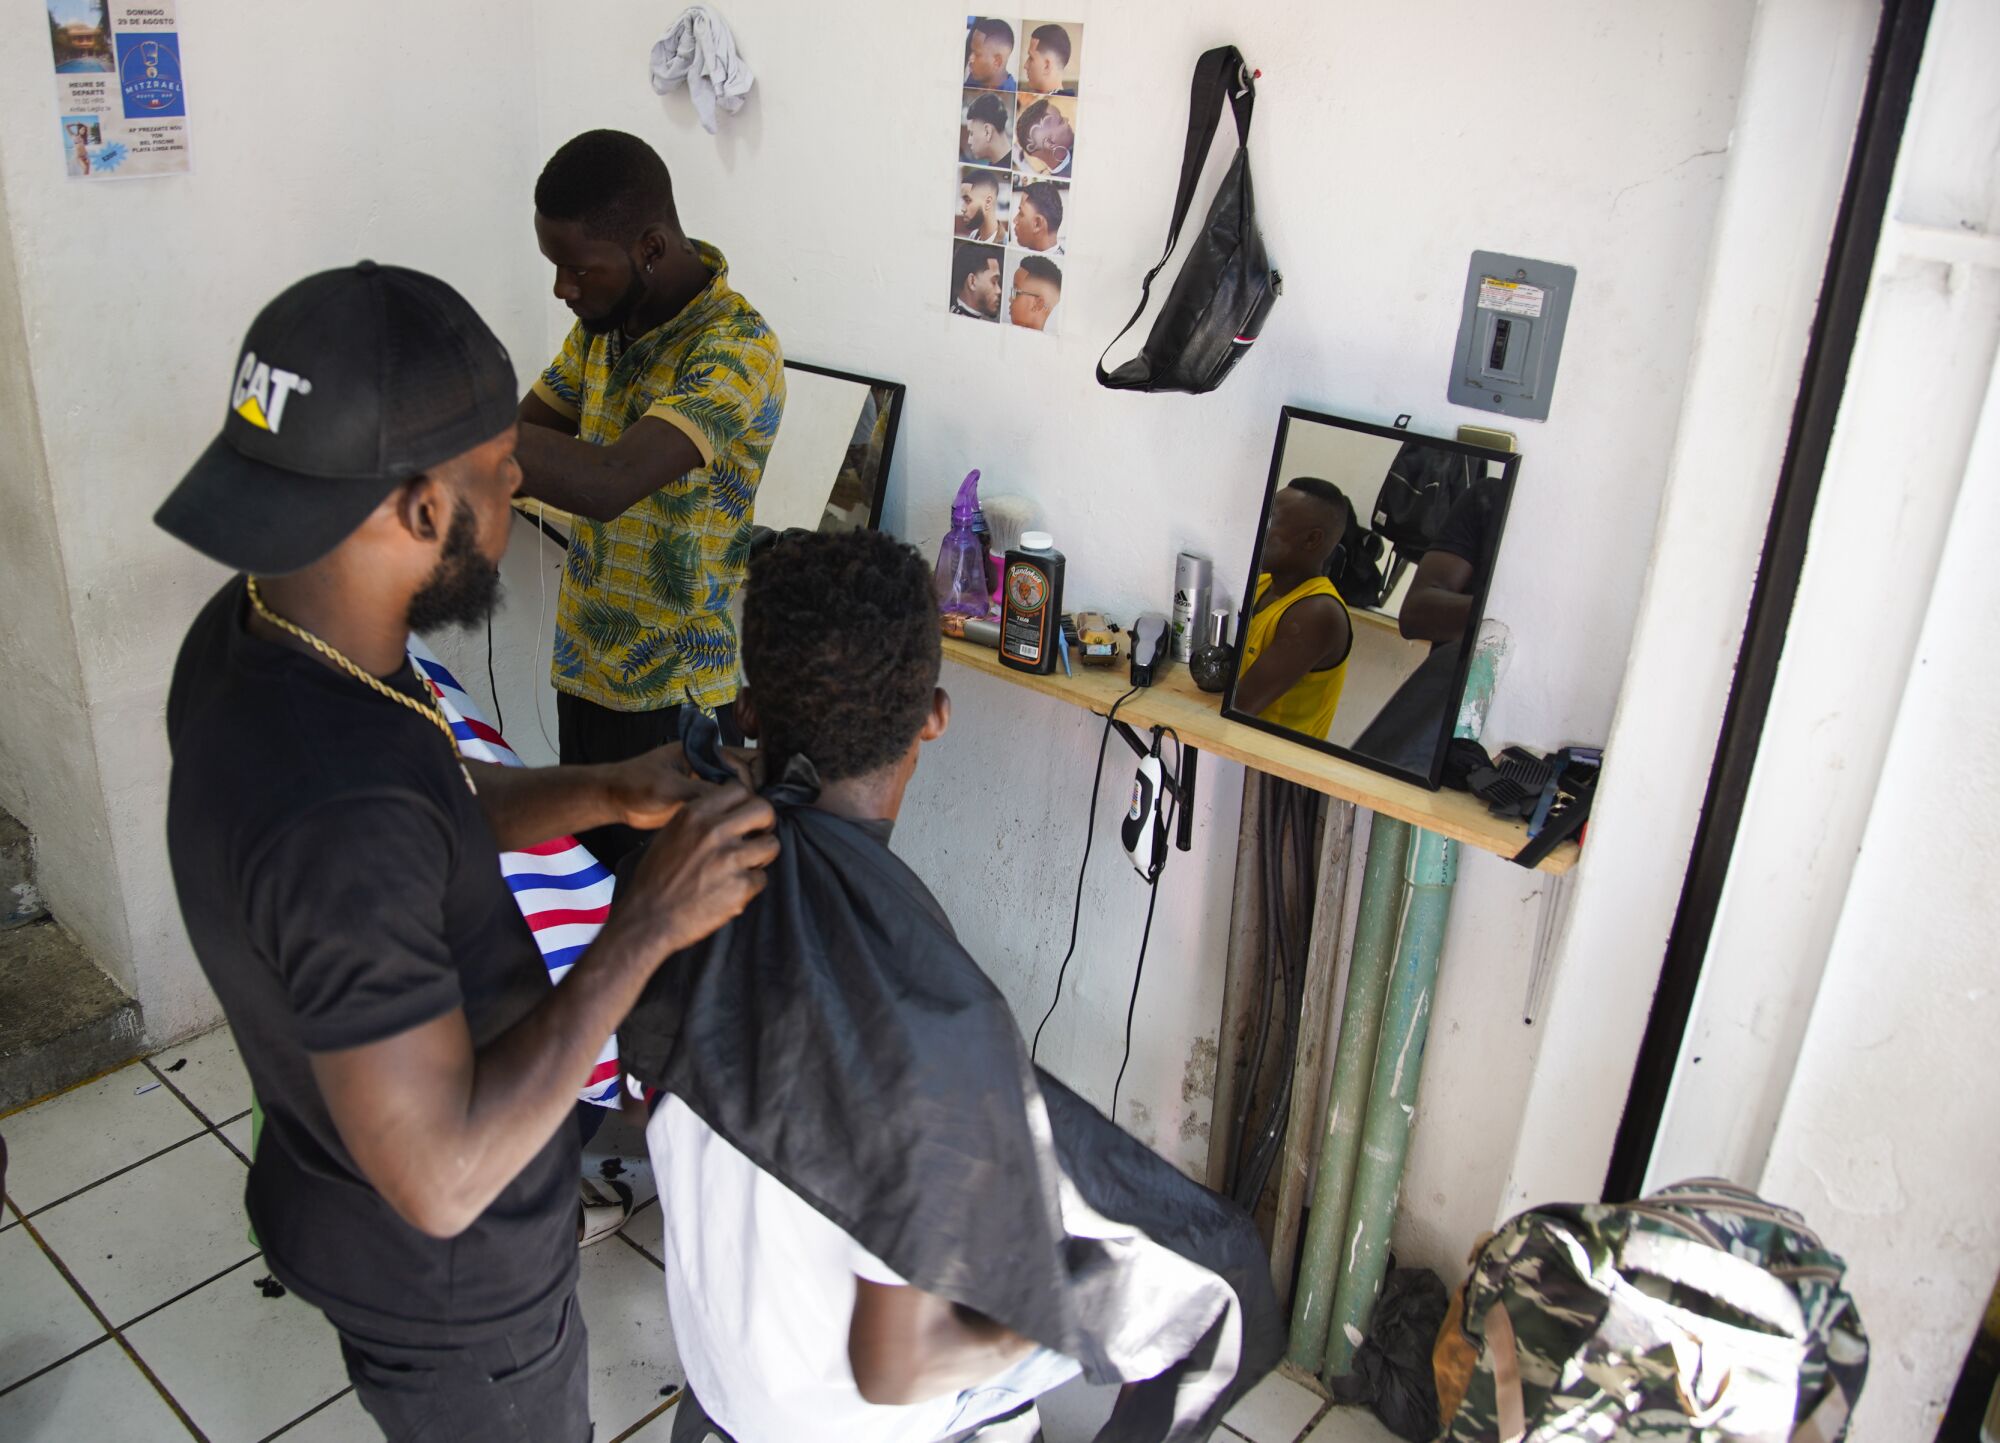 A Haitian man cuts hair in the barbershop he opened recently